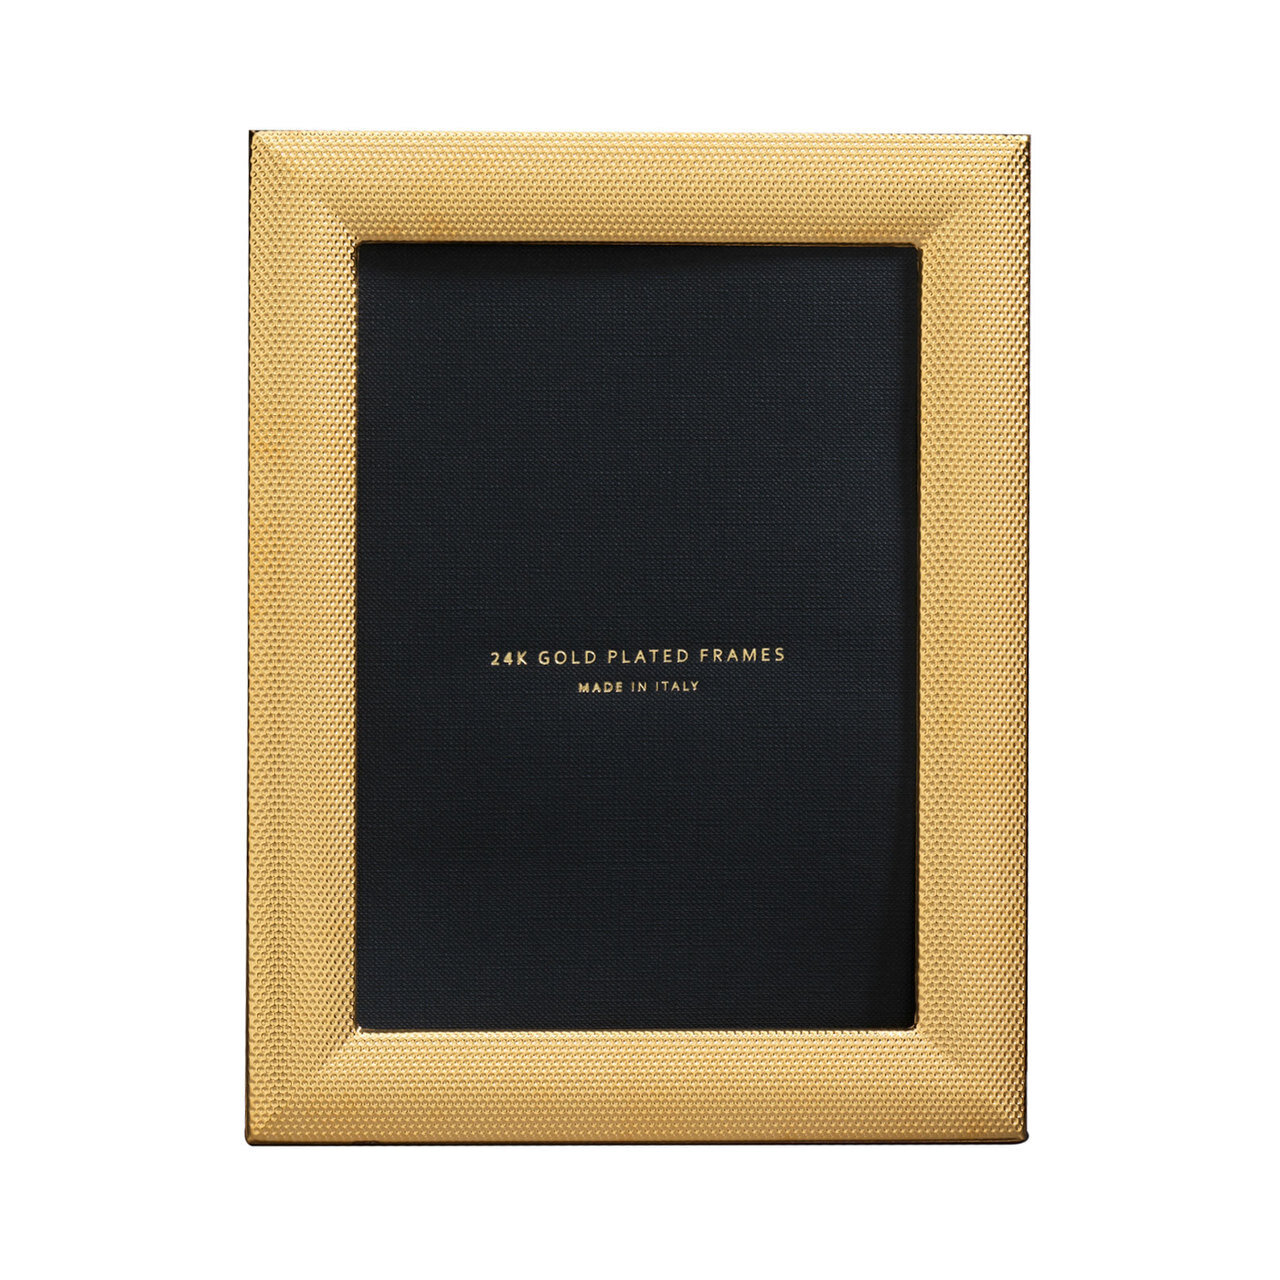 Cunill Cleo 5 x 7 Inch Picture Frame - 24k Gold Plated 0.5 Microns